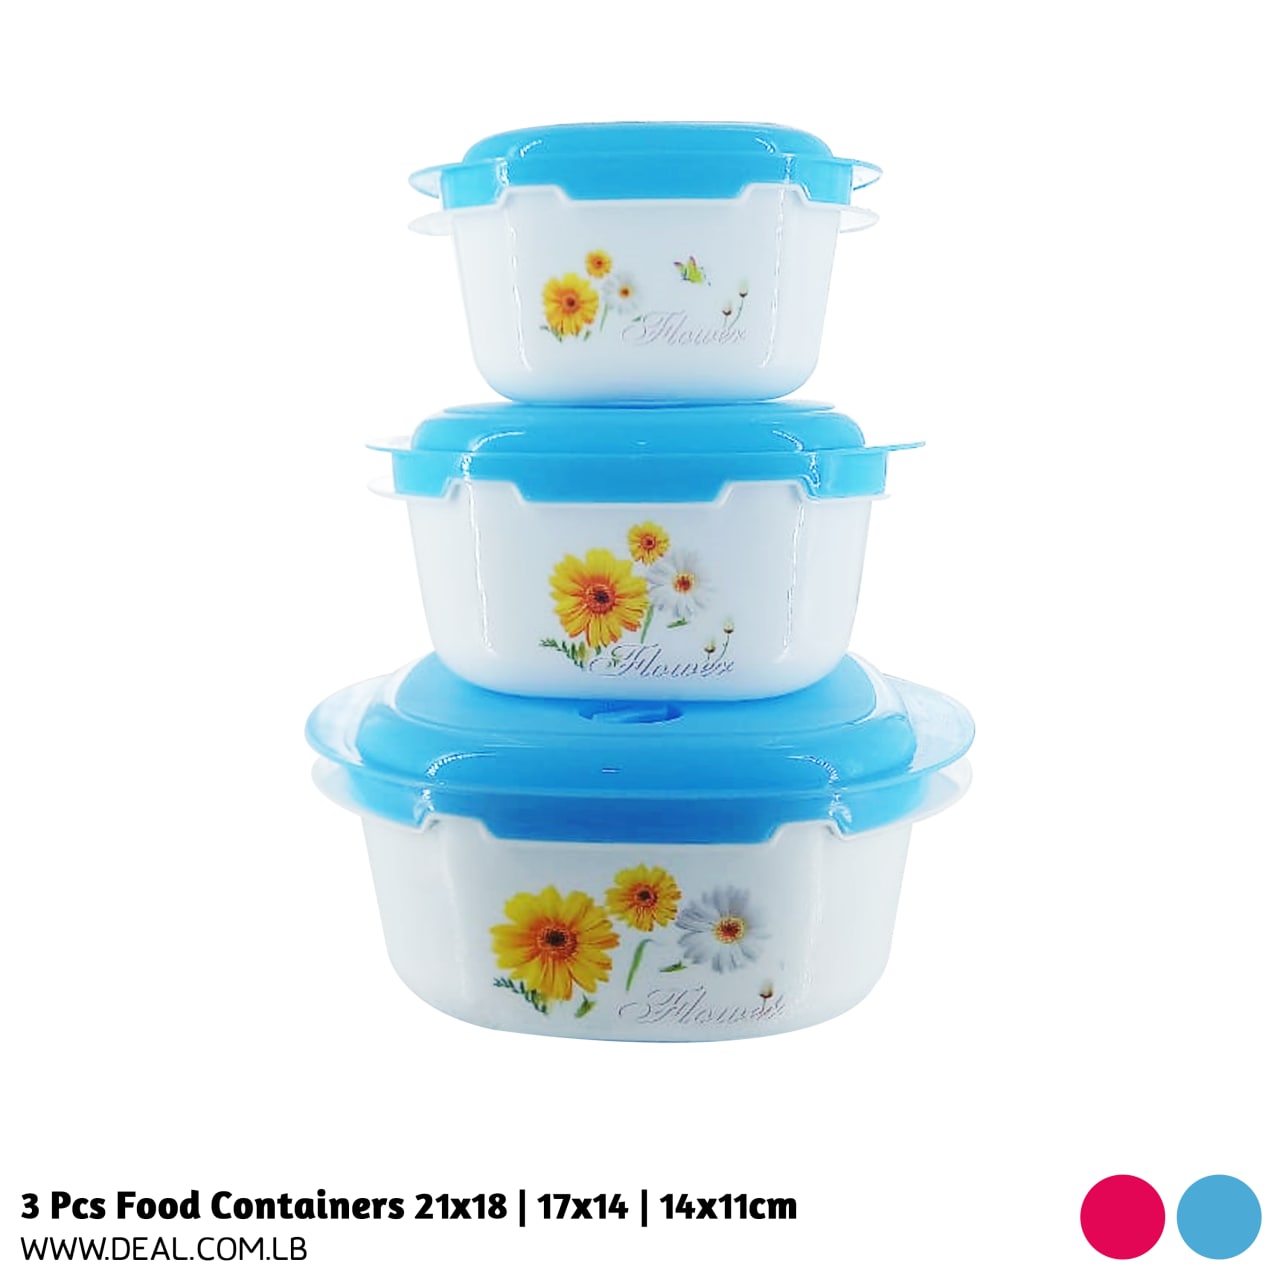 3+Pcs+Food+Containers+21x18+-+17x14+-+14x11cm